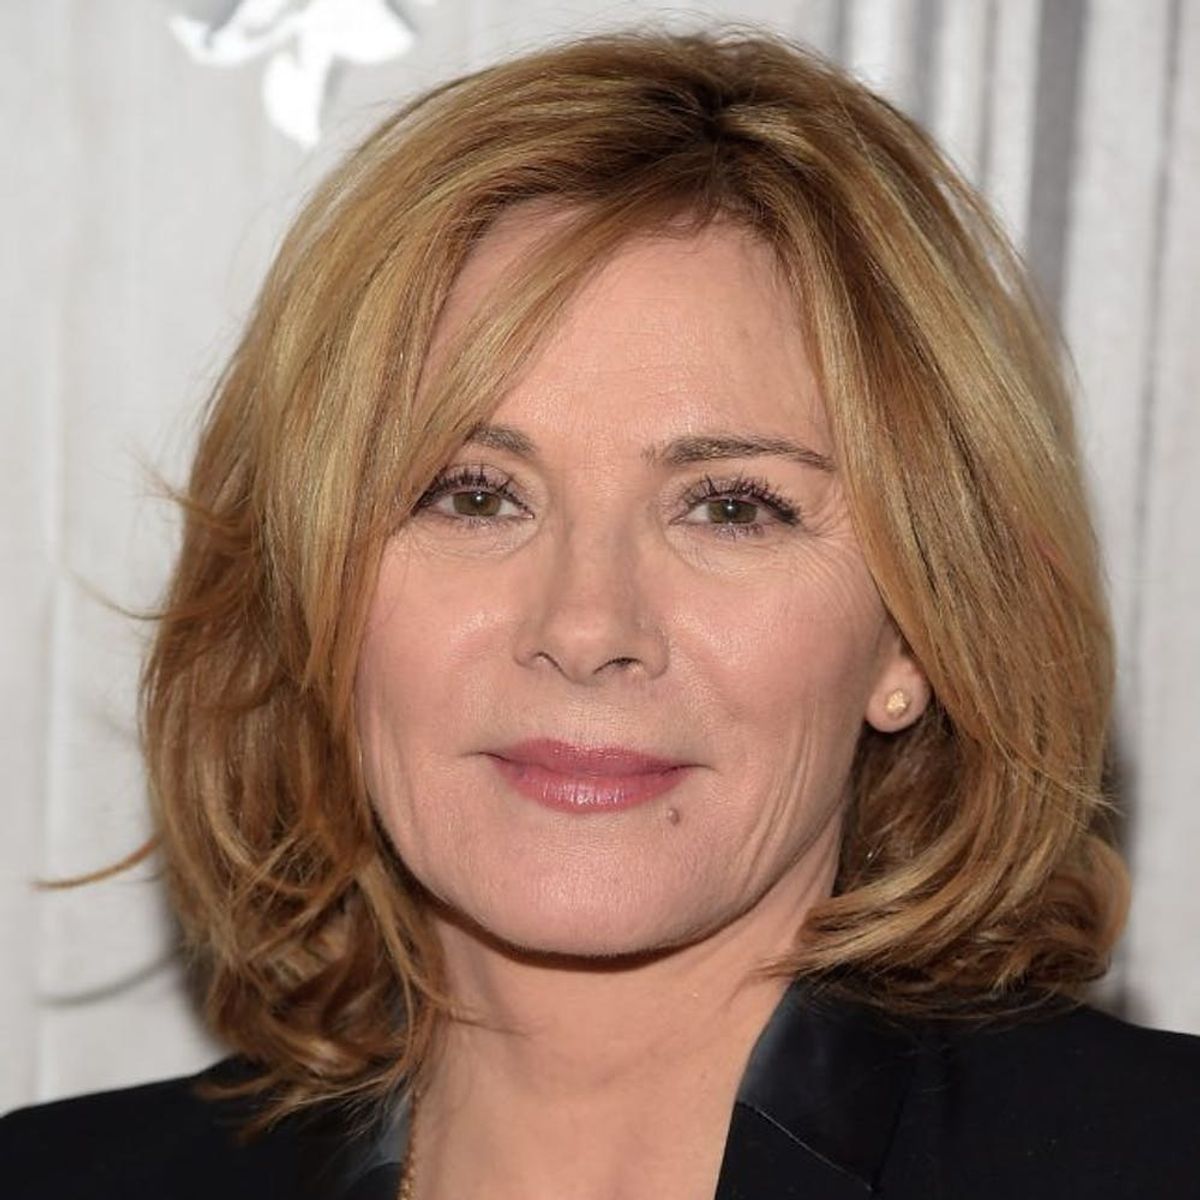 Kim Cattrall May Have Just Confirmed a Samantha Jones SATC Spinoff